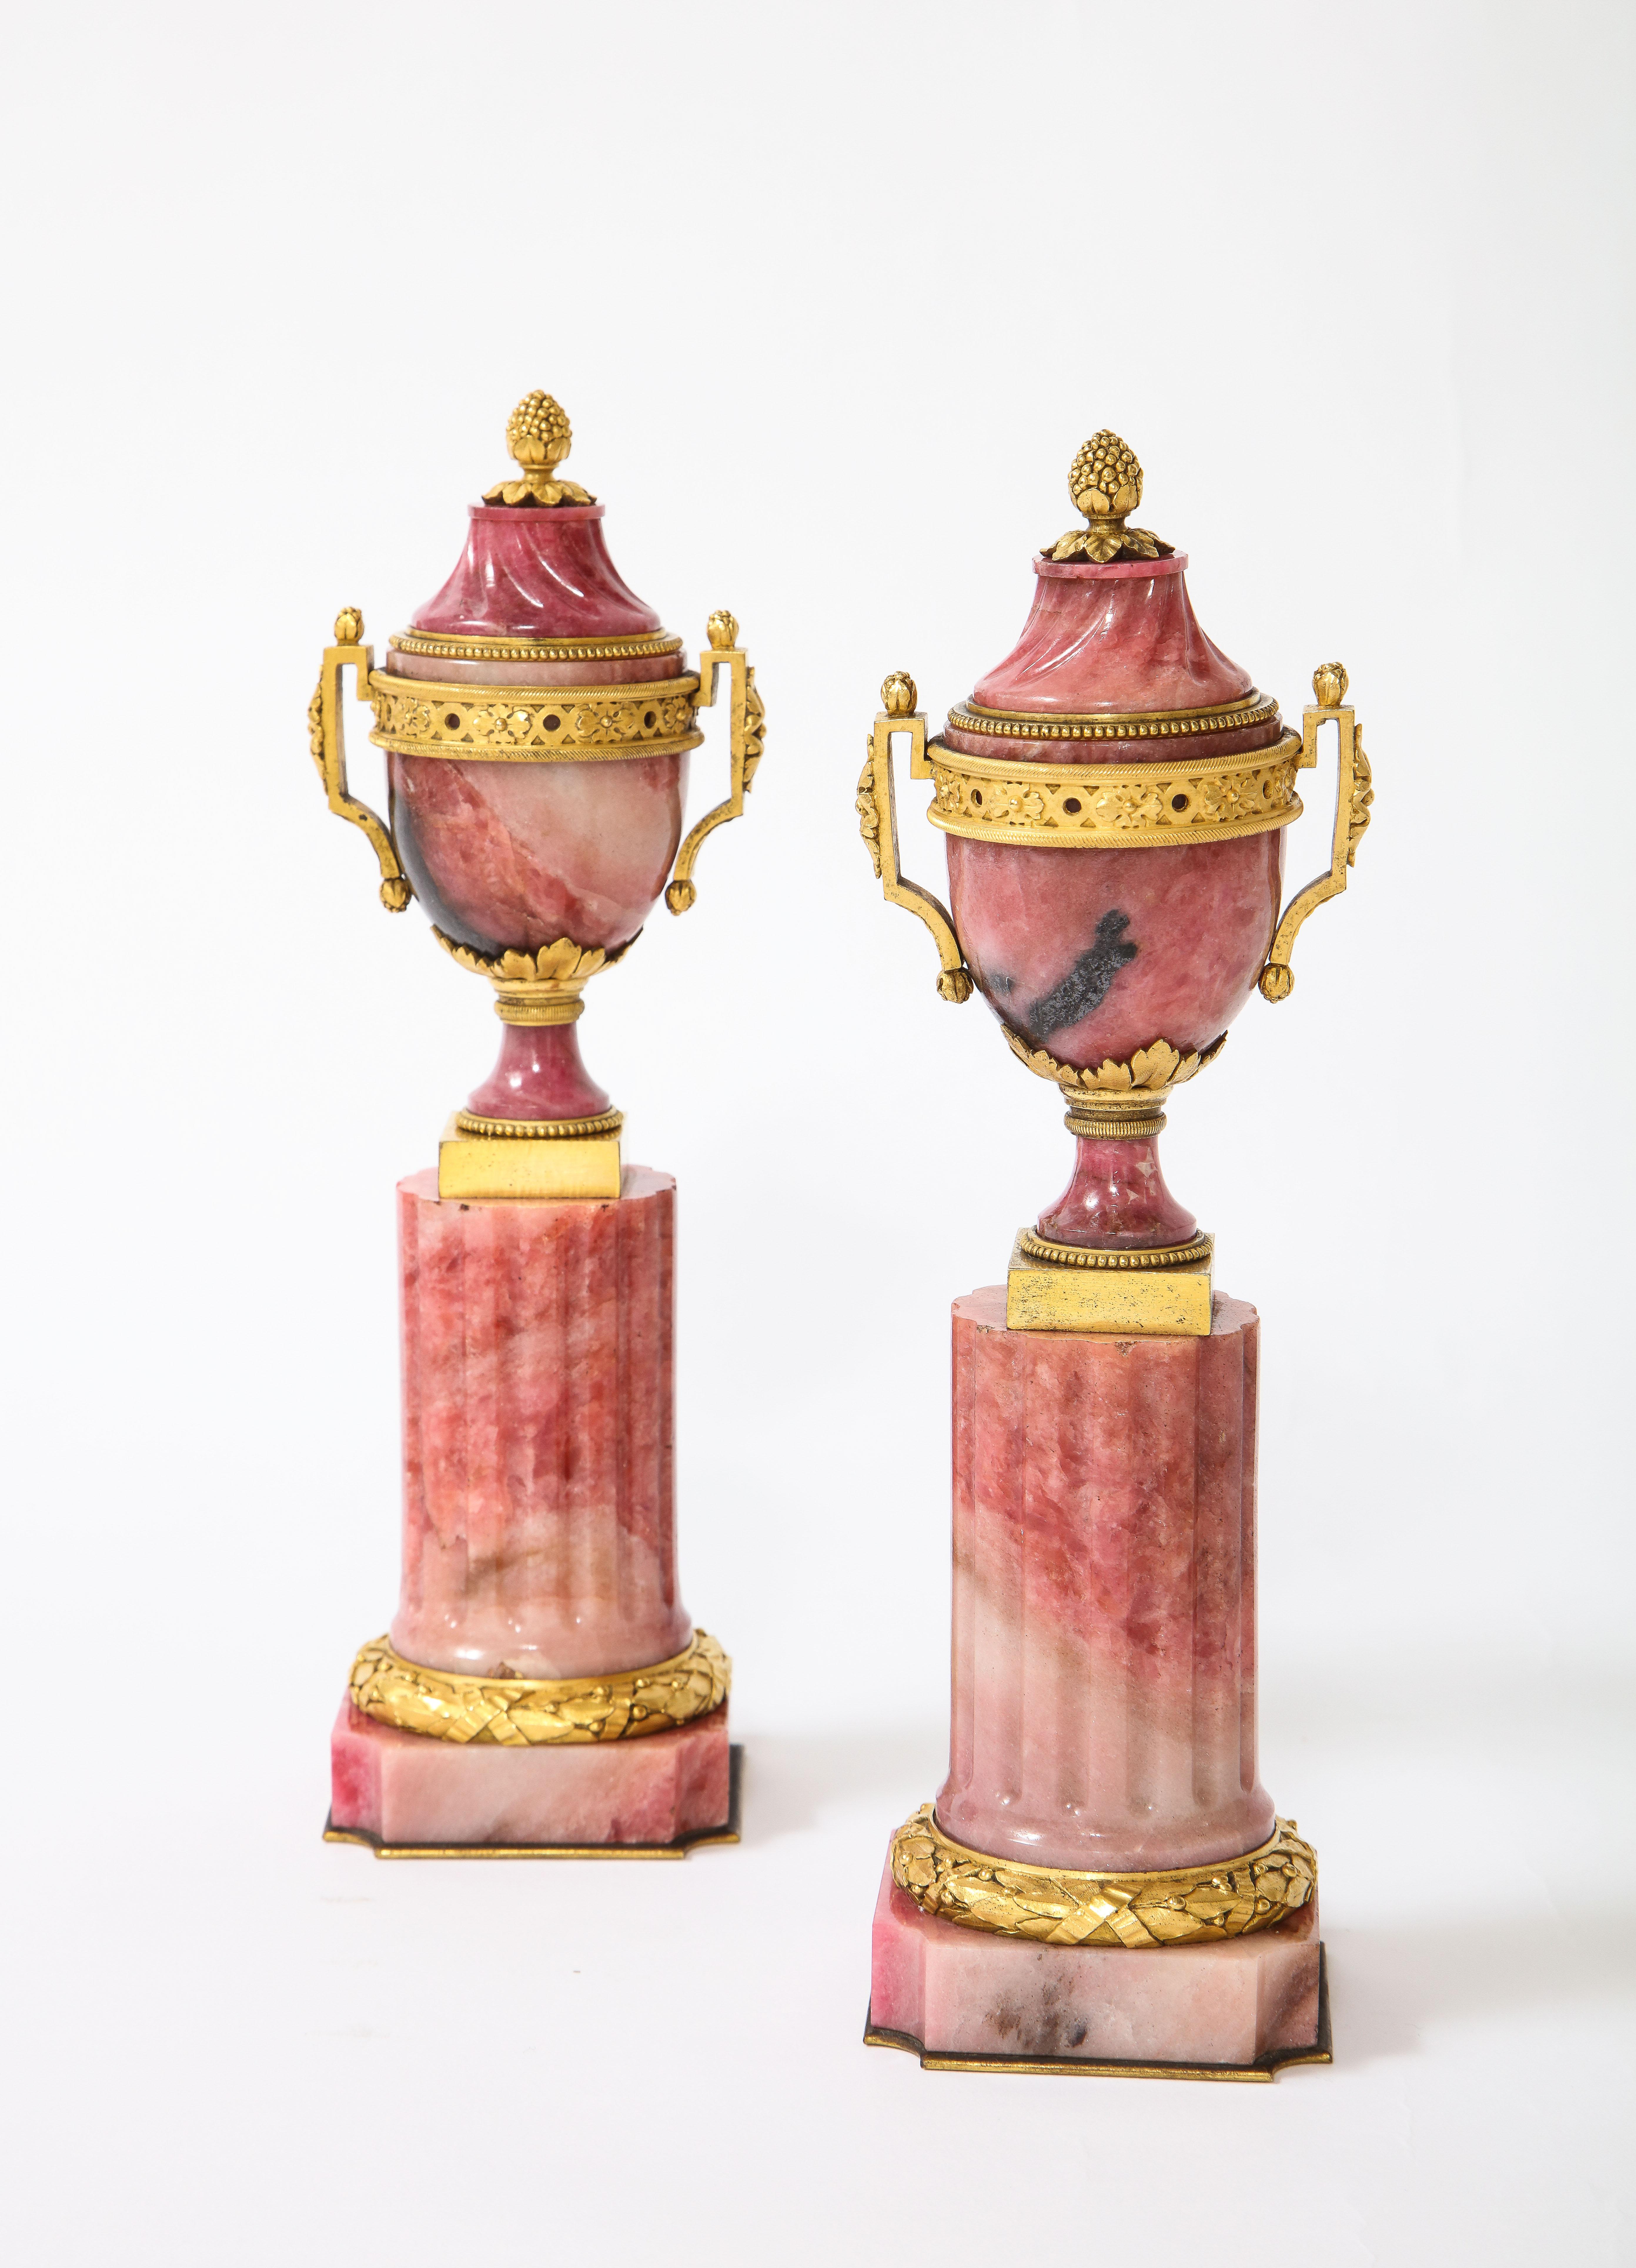 A Marvelous and Gorgeous pair of Russian Louis XVI style dore bronze mounted hand-carved Rhodonite Cassolettes. Each section, from the urn to the plinth, is exceptionally hand-carved and hand-polished to create a vibrant sheen and shine. The plinth